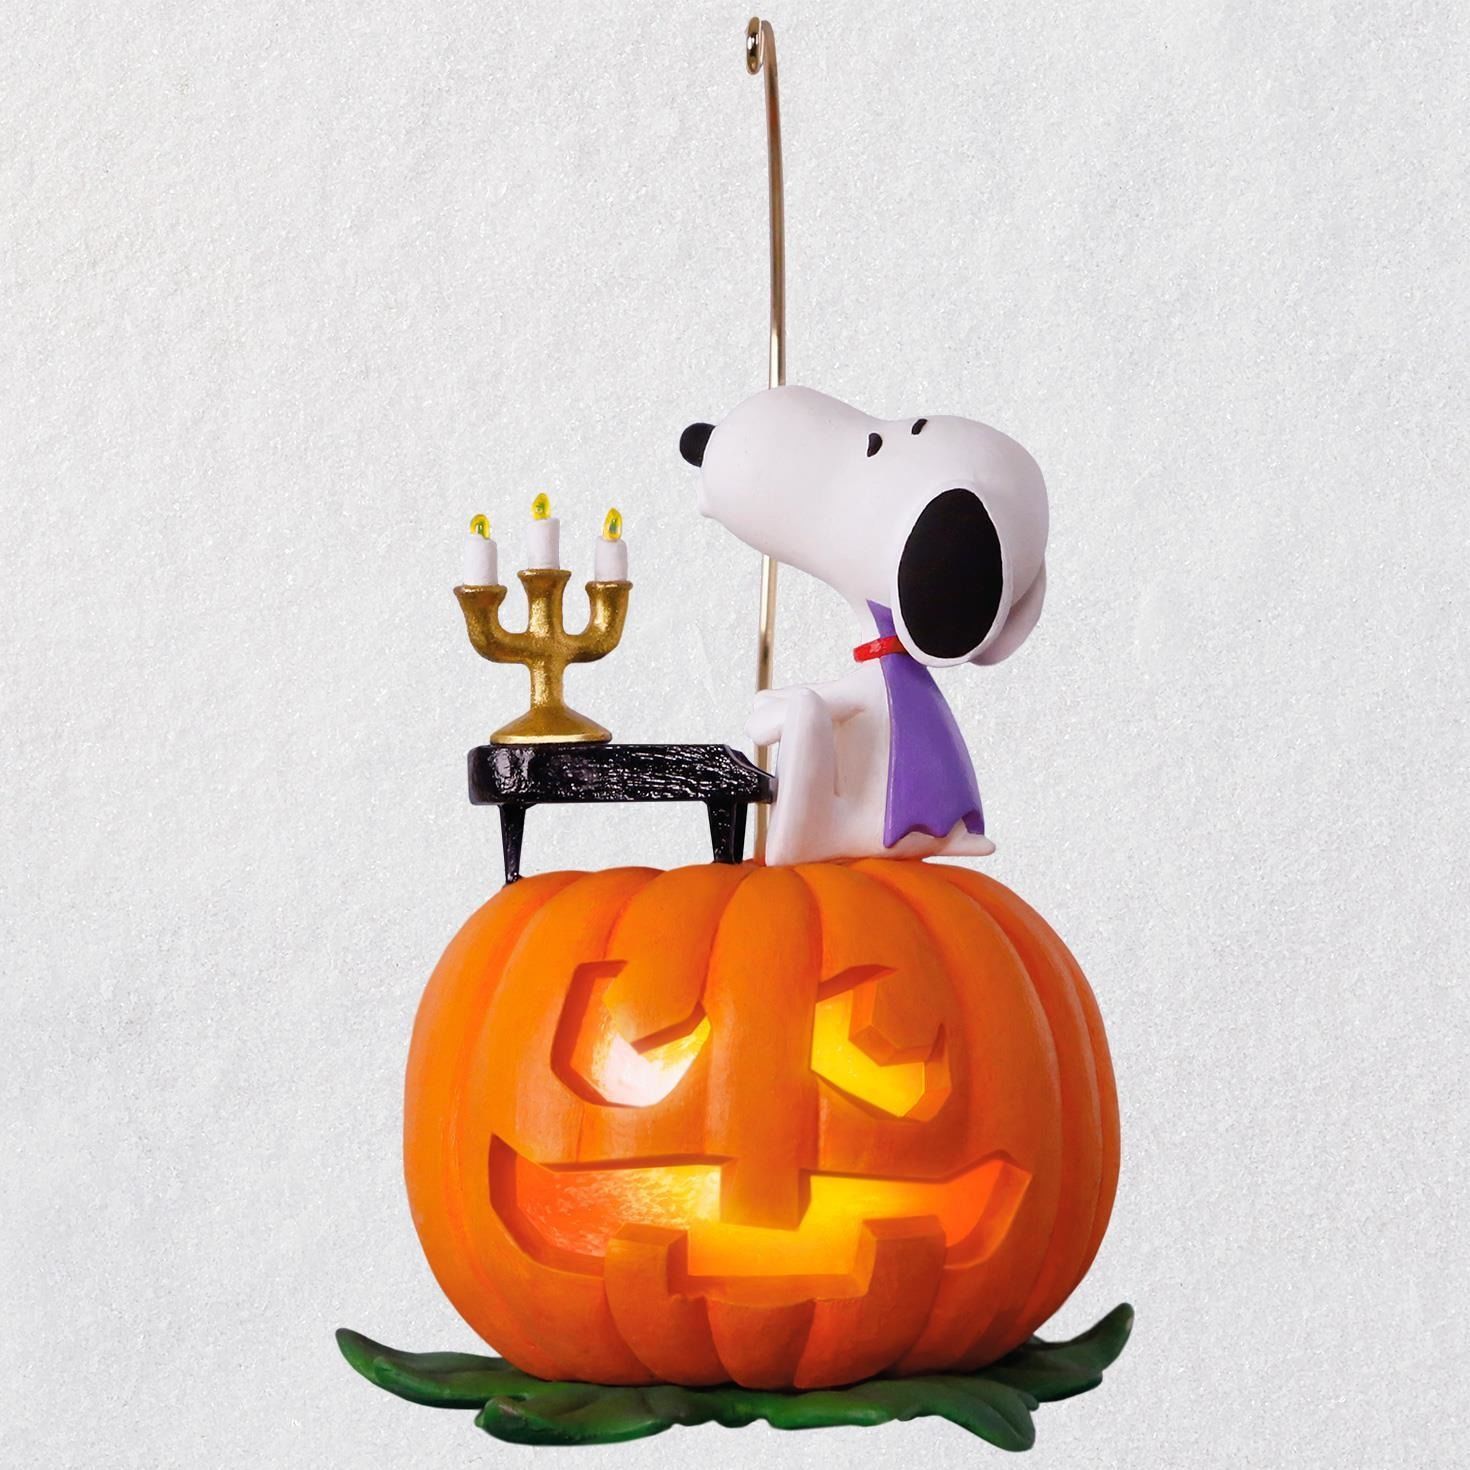 The Peanuts Gang Spooky Snoopy Musical Halloween Ornament with Light